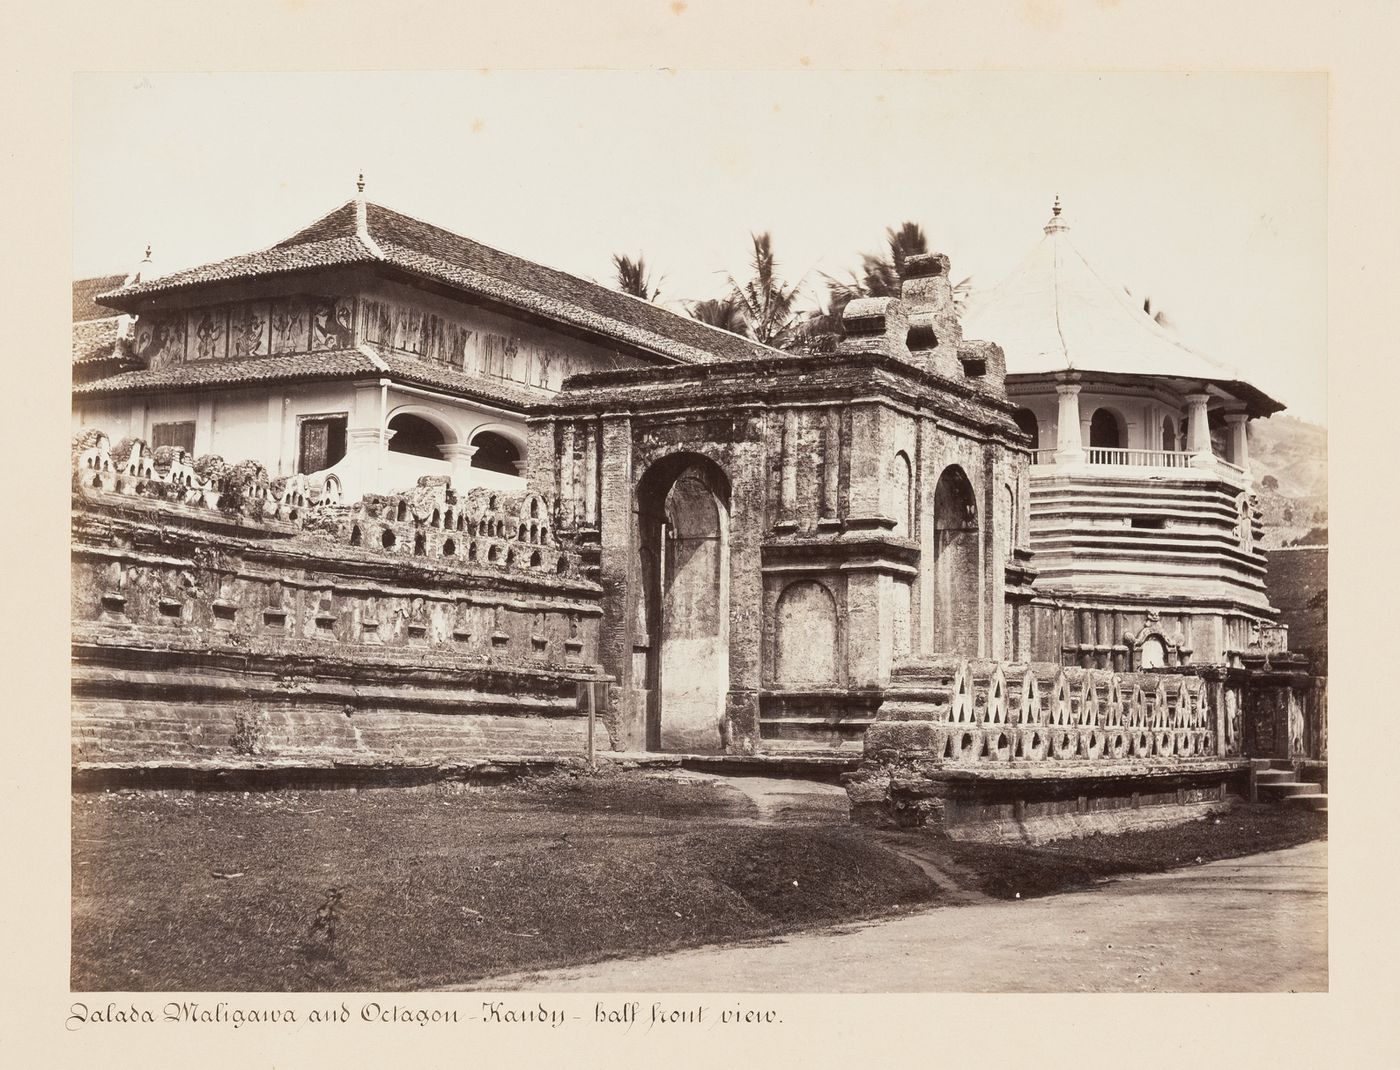 View of the entrance gateway and walls of the Temple of the Tooth (also known as the Sri Dalada Maligawa) with temple buildings in the background, Kandy, Ceylon (now Sri Lanka)